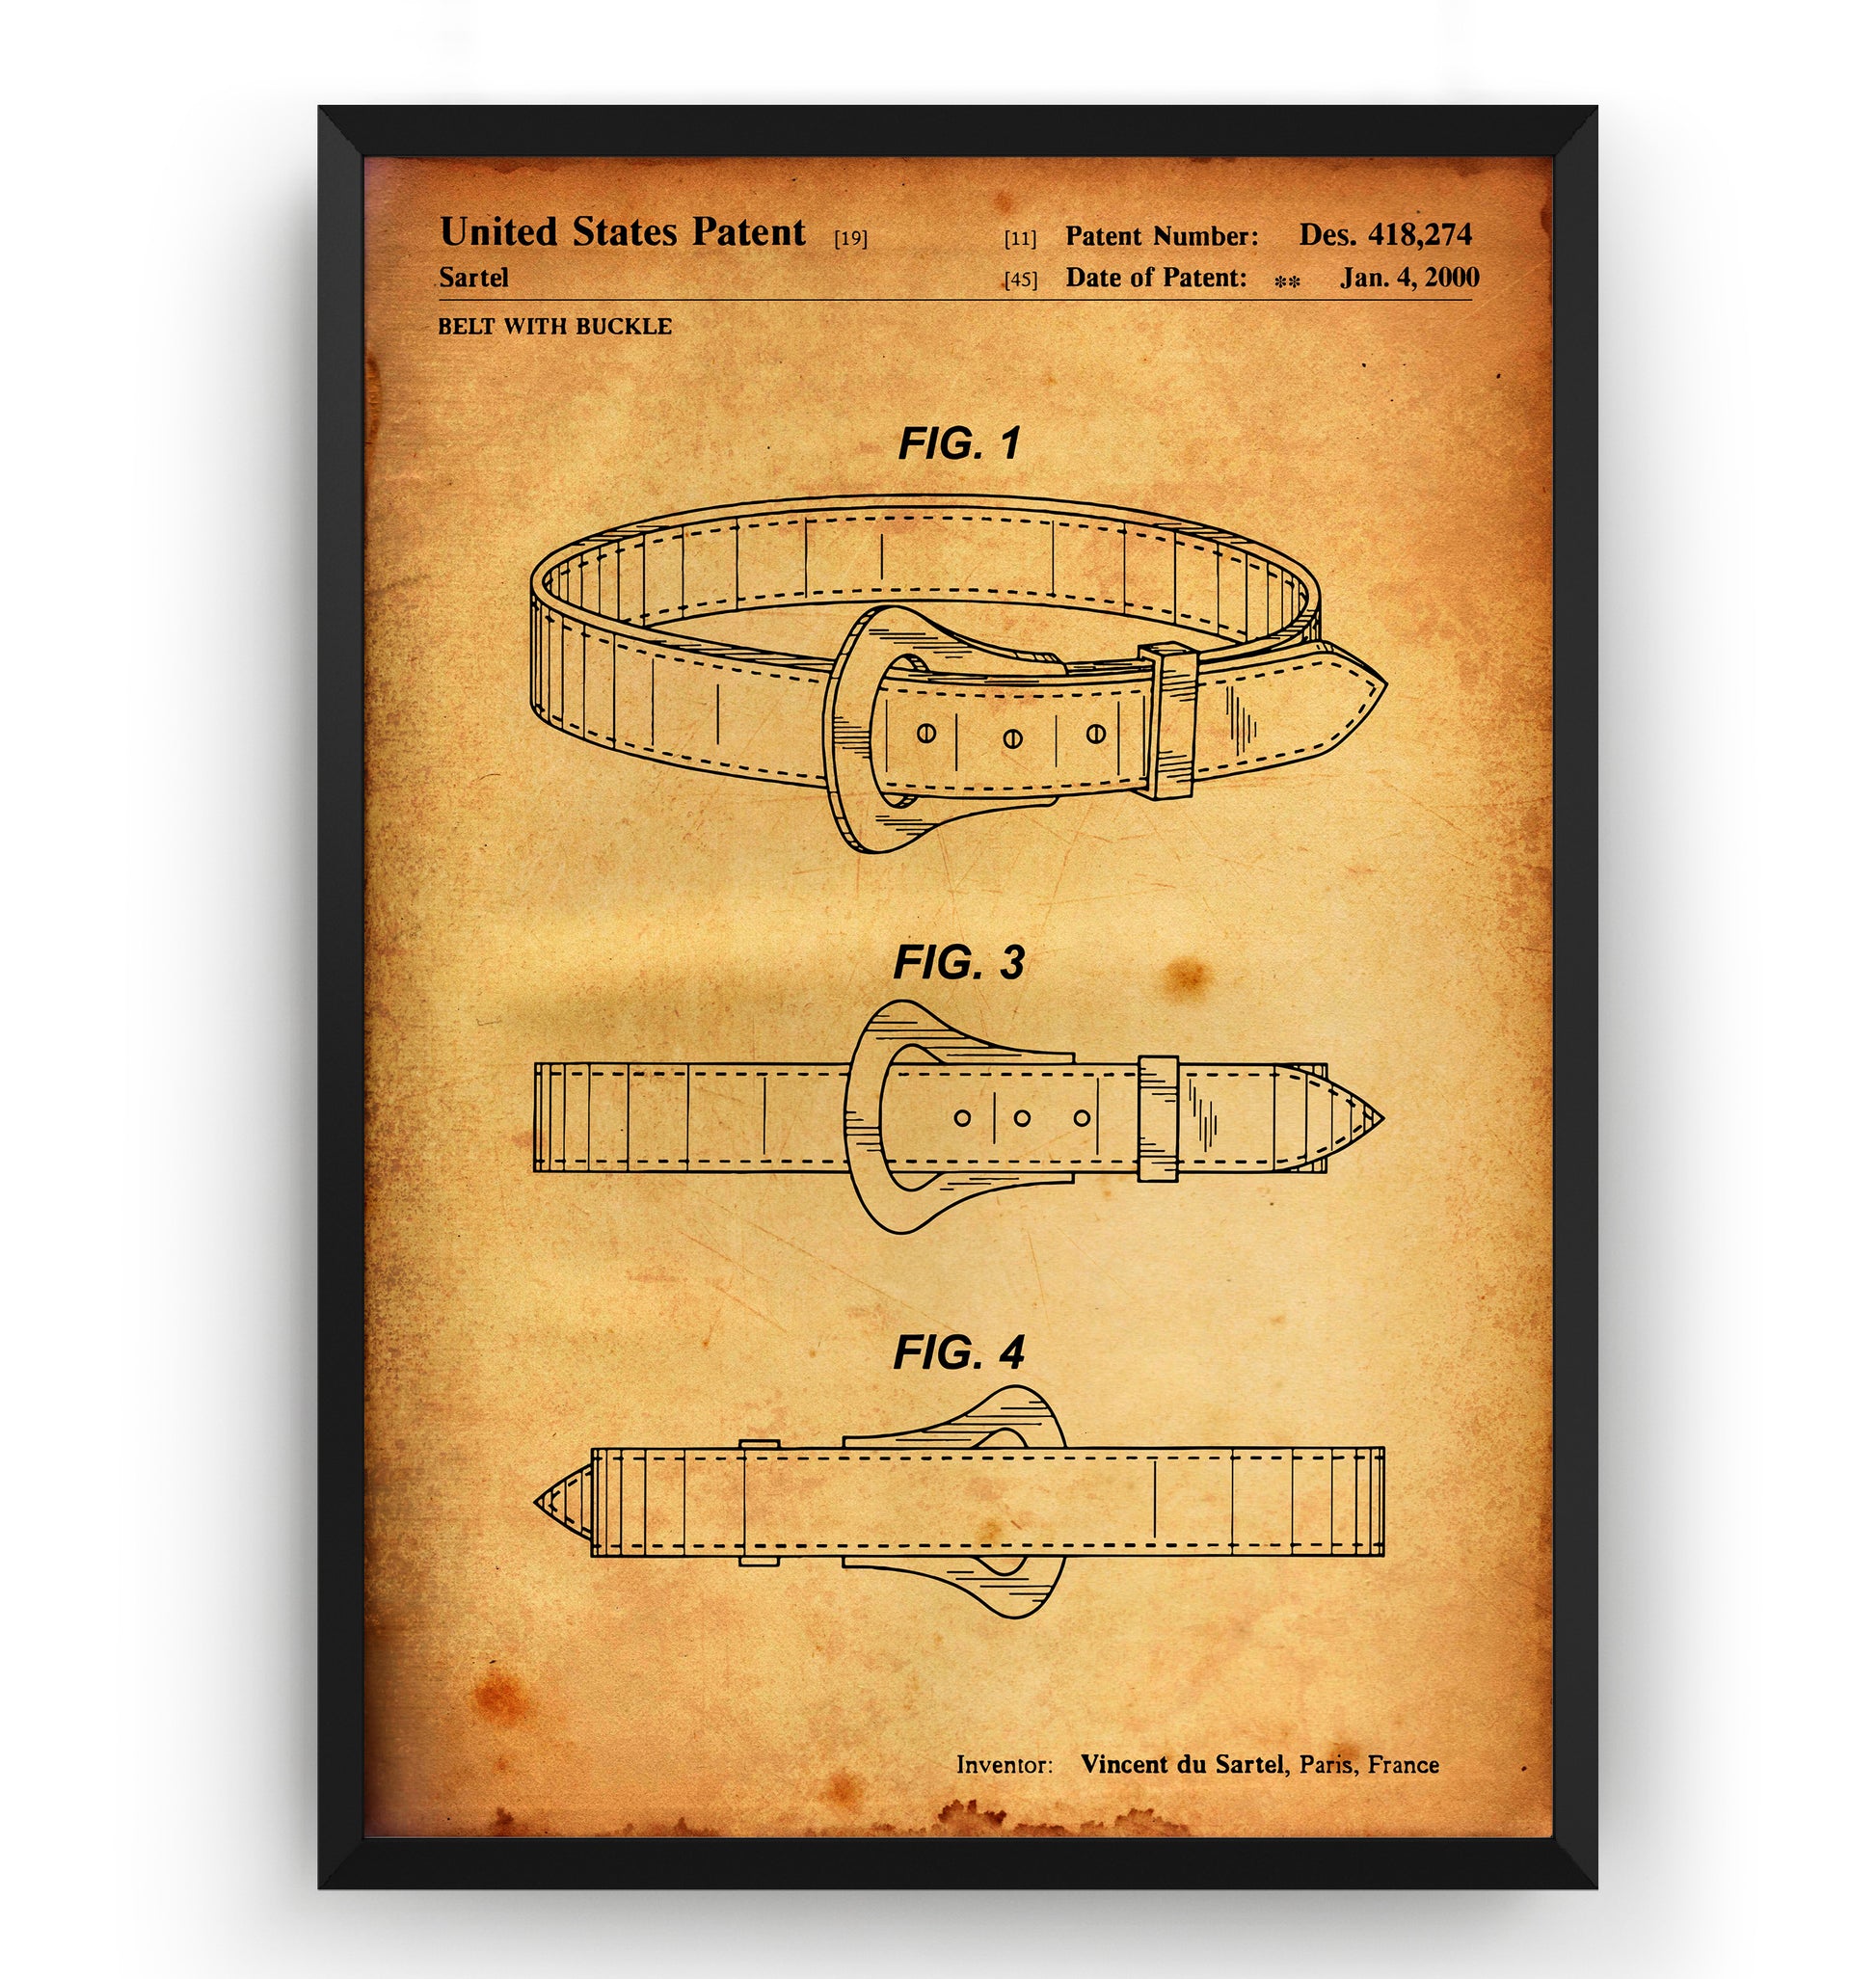 LV Belt With Buckle 2000 Patent Print - Magic Posters